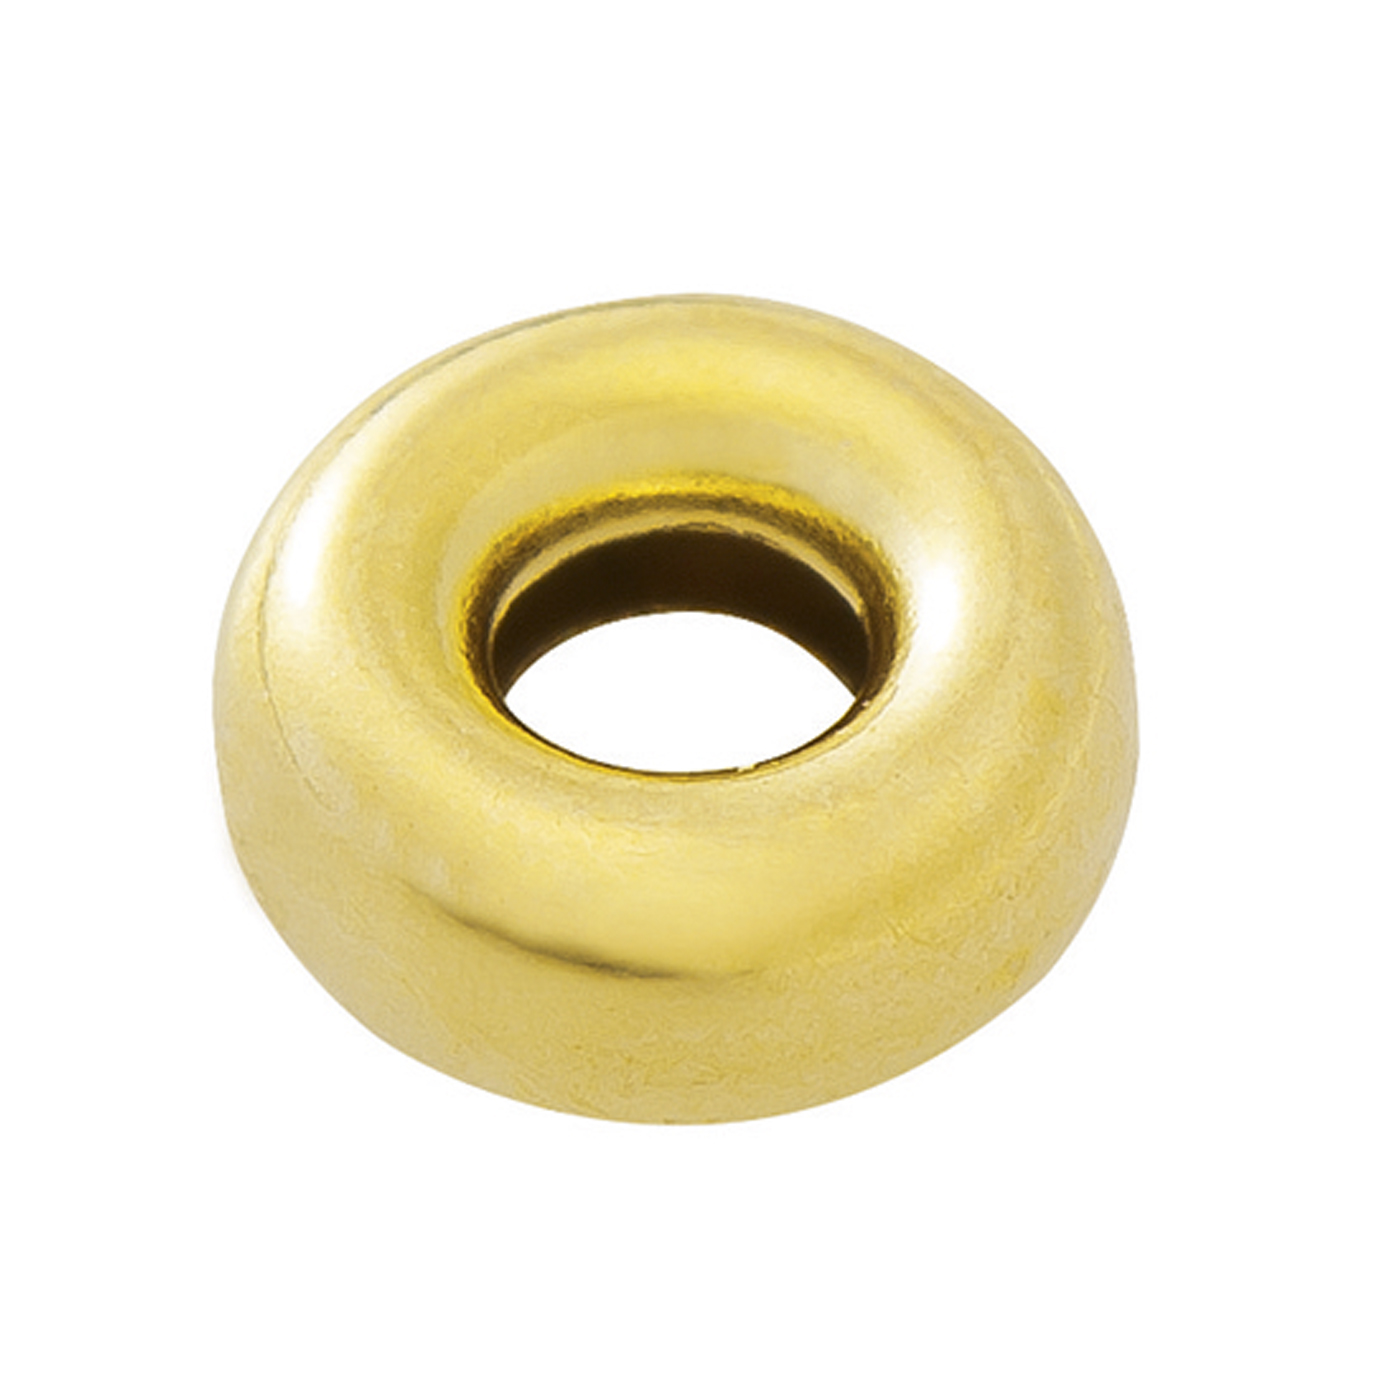 Hollow Ring, Rolled Gold Polished, ø 3 x 1.5 mm - 1 piece